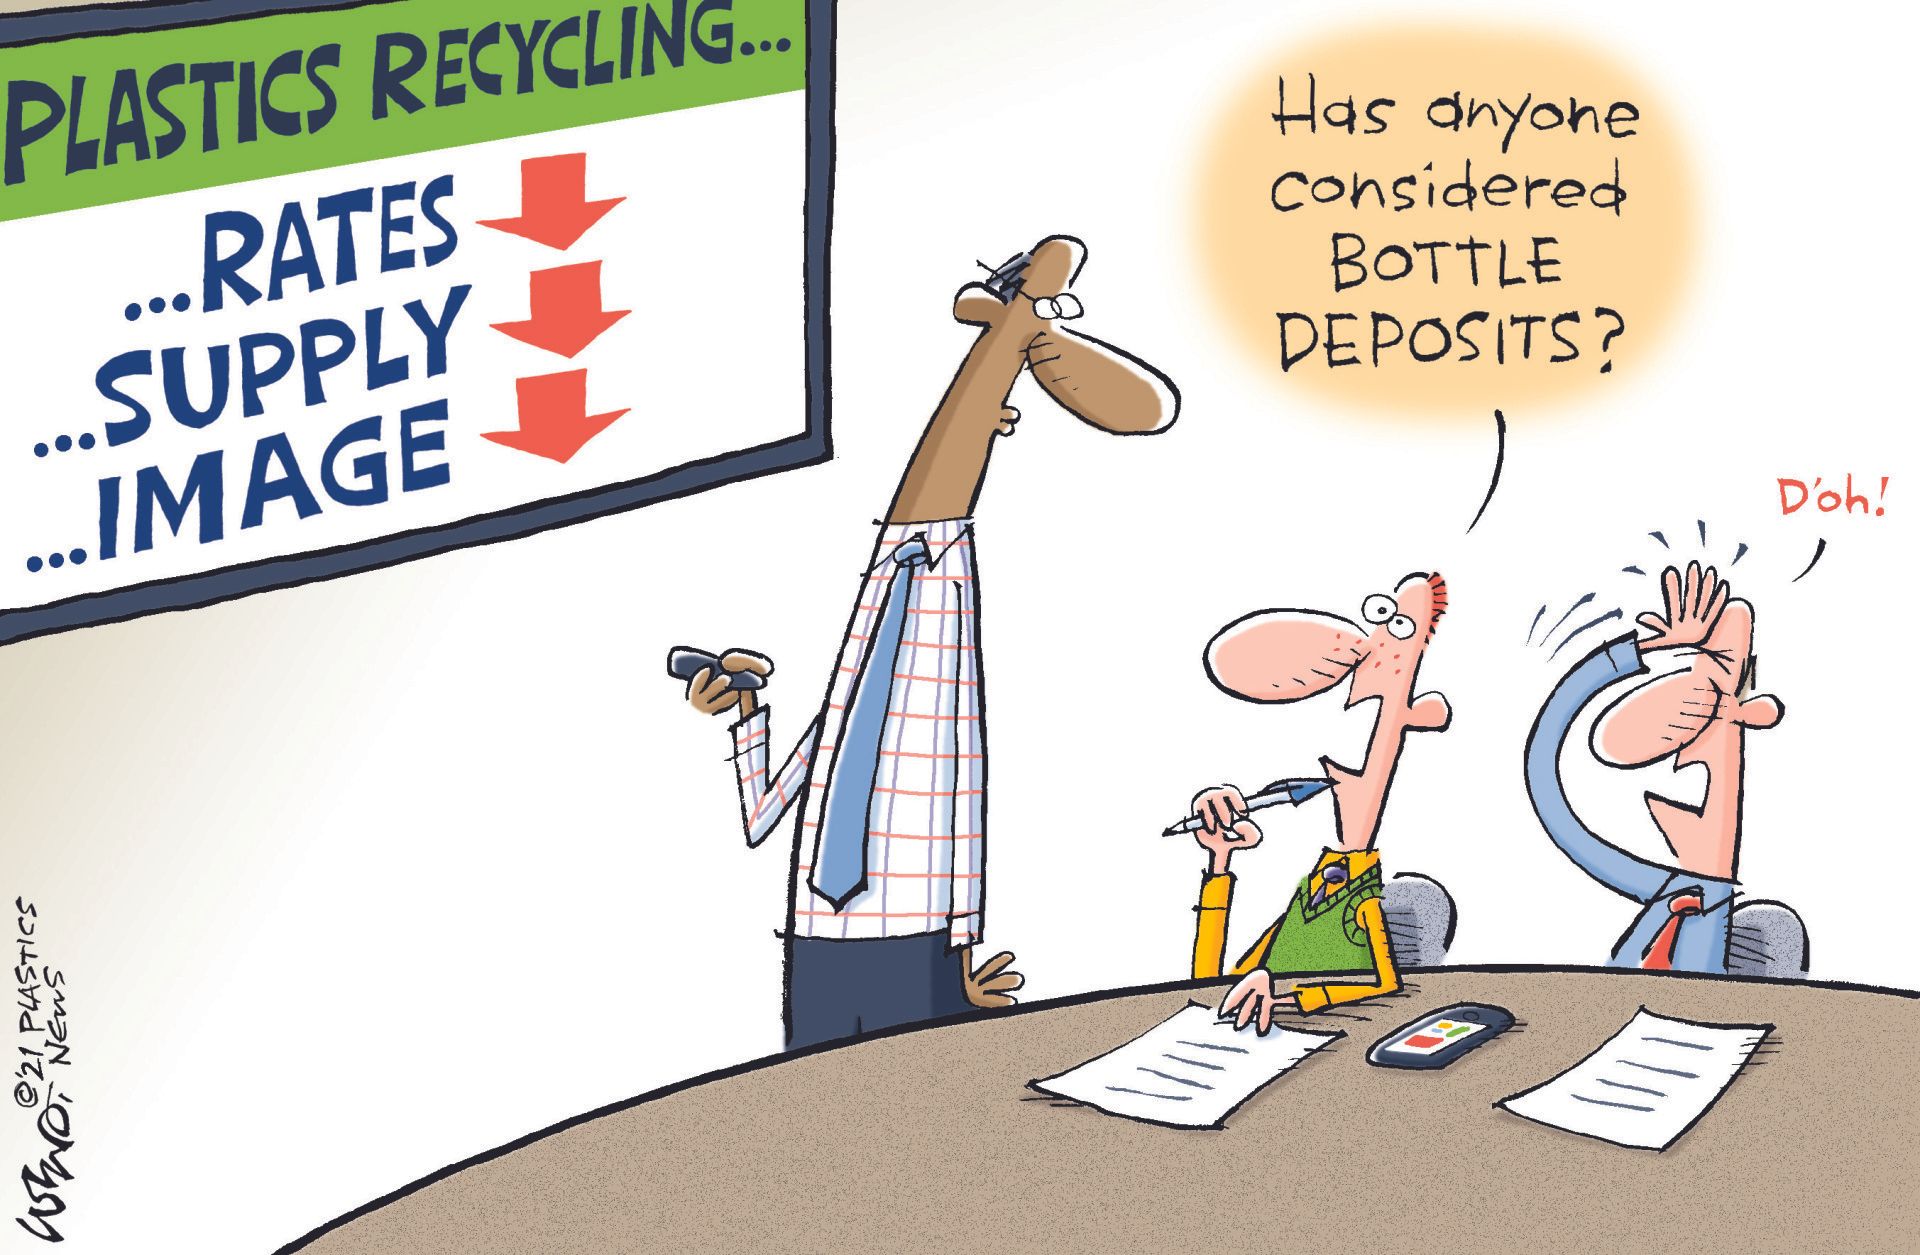 Cartoon about bottle deposits on plastic containers - Copyright 2021 Plastics News